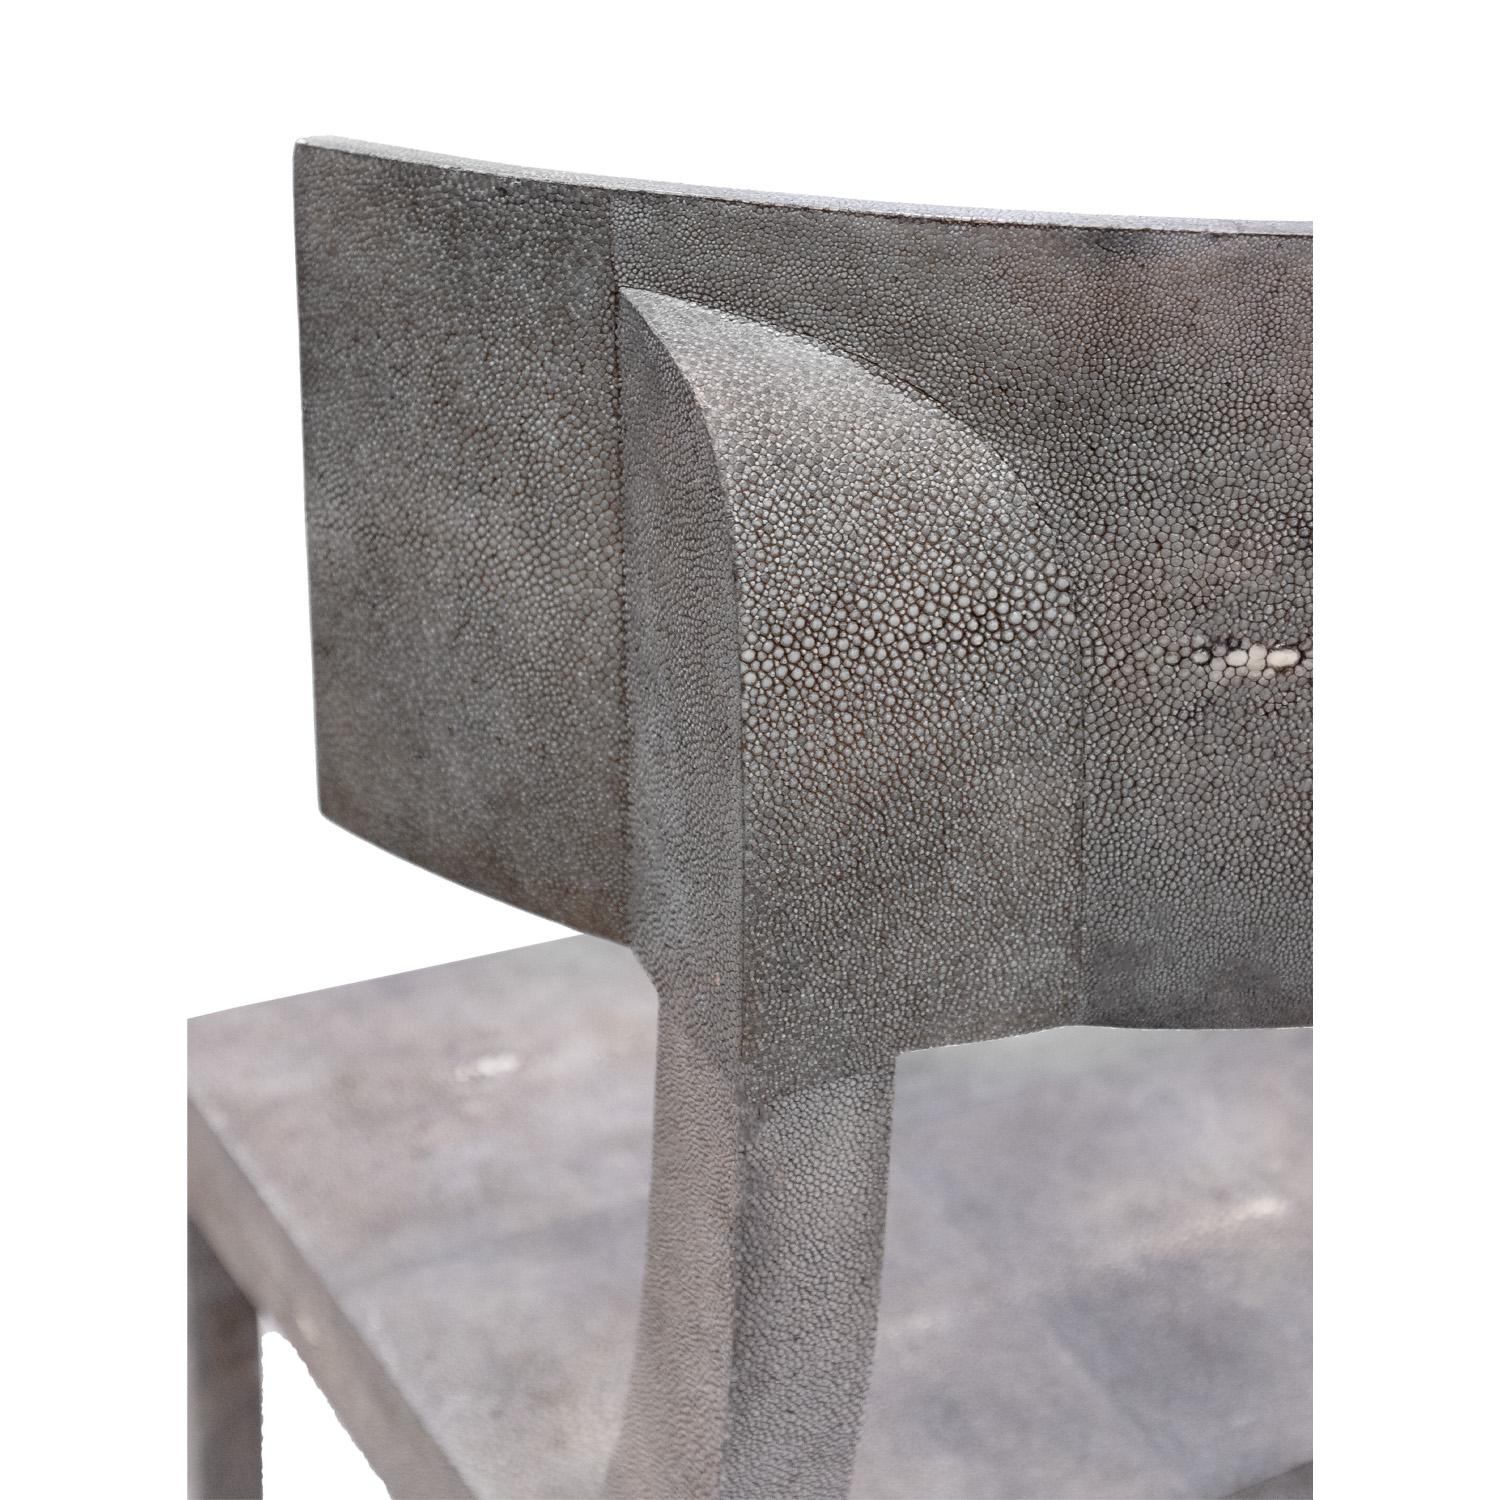 Late 20th Century Exquisite Klismos Chair in Blue/Gray Shagreen with Brass Sabots 1980s For Sale